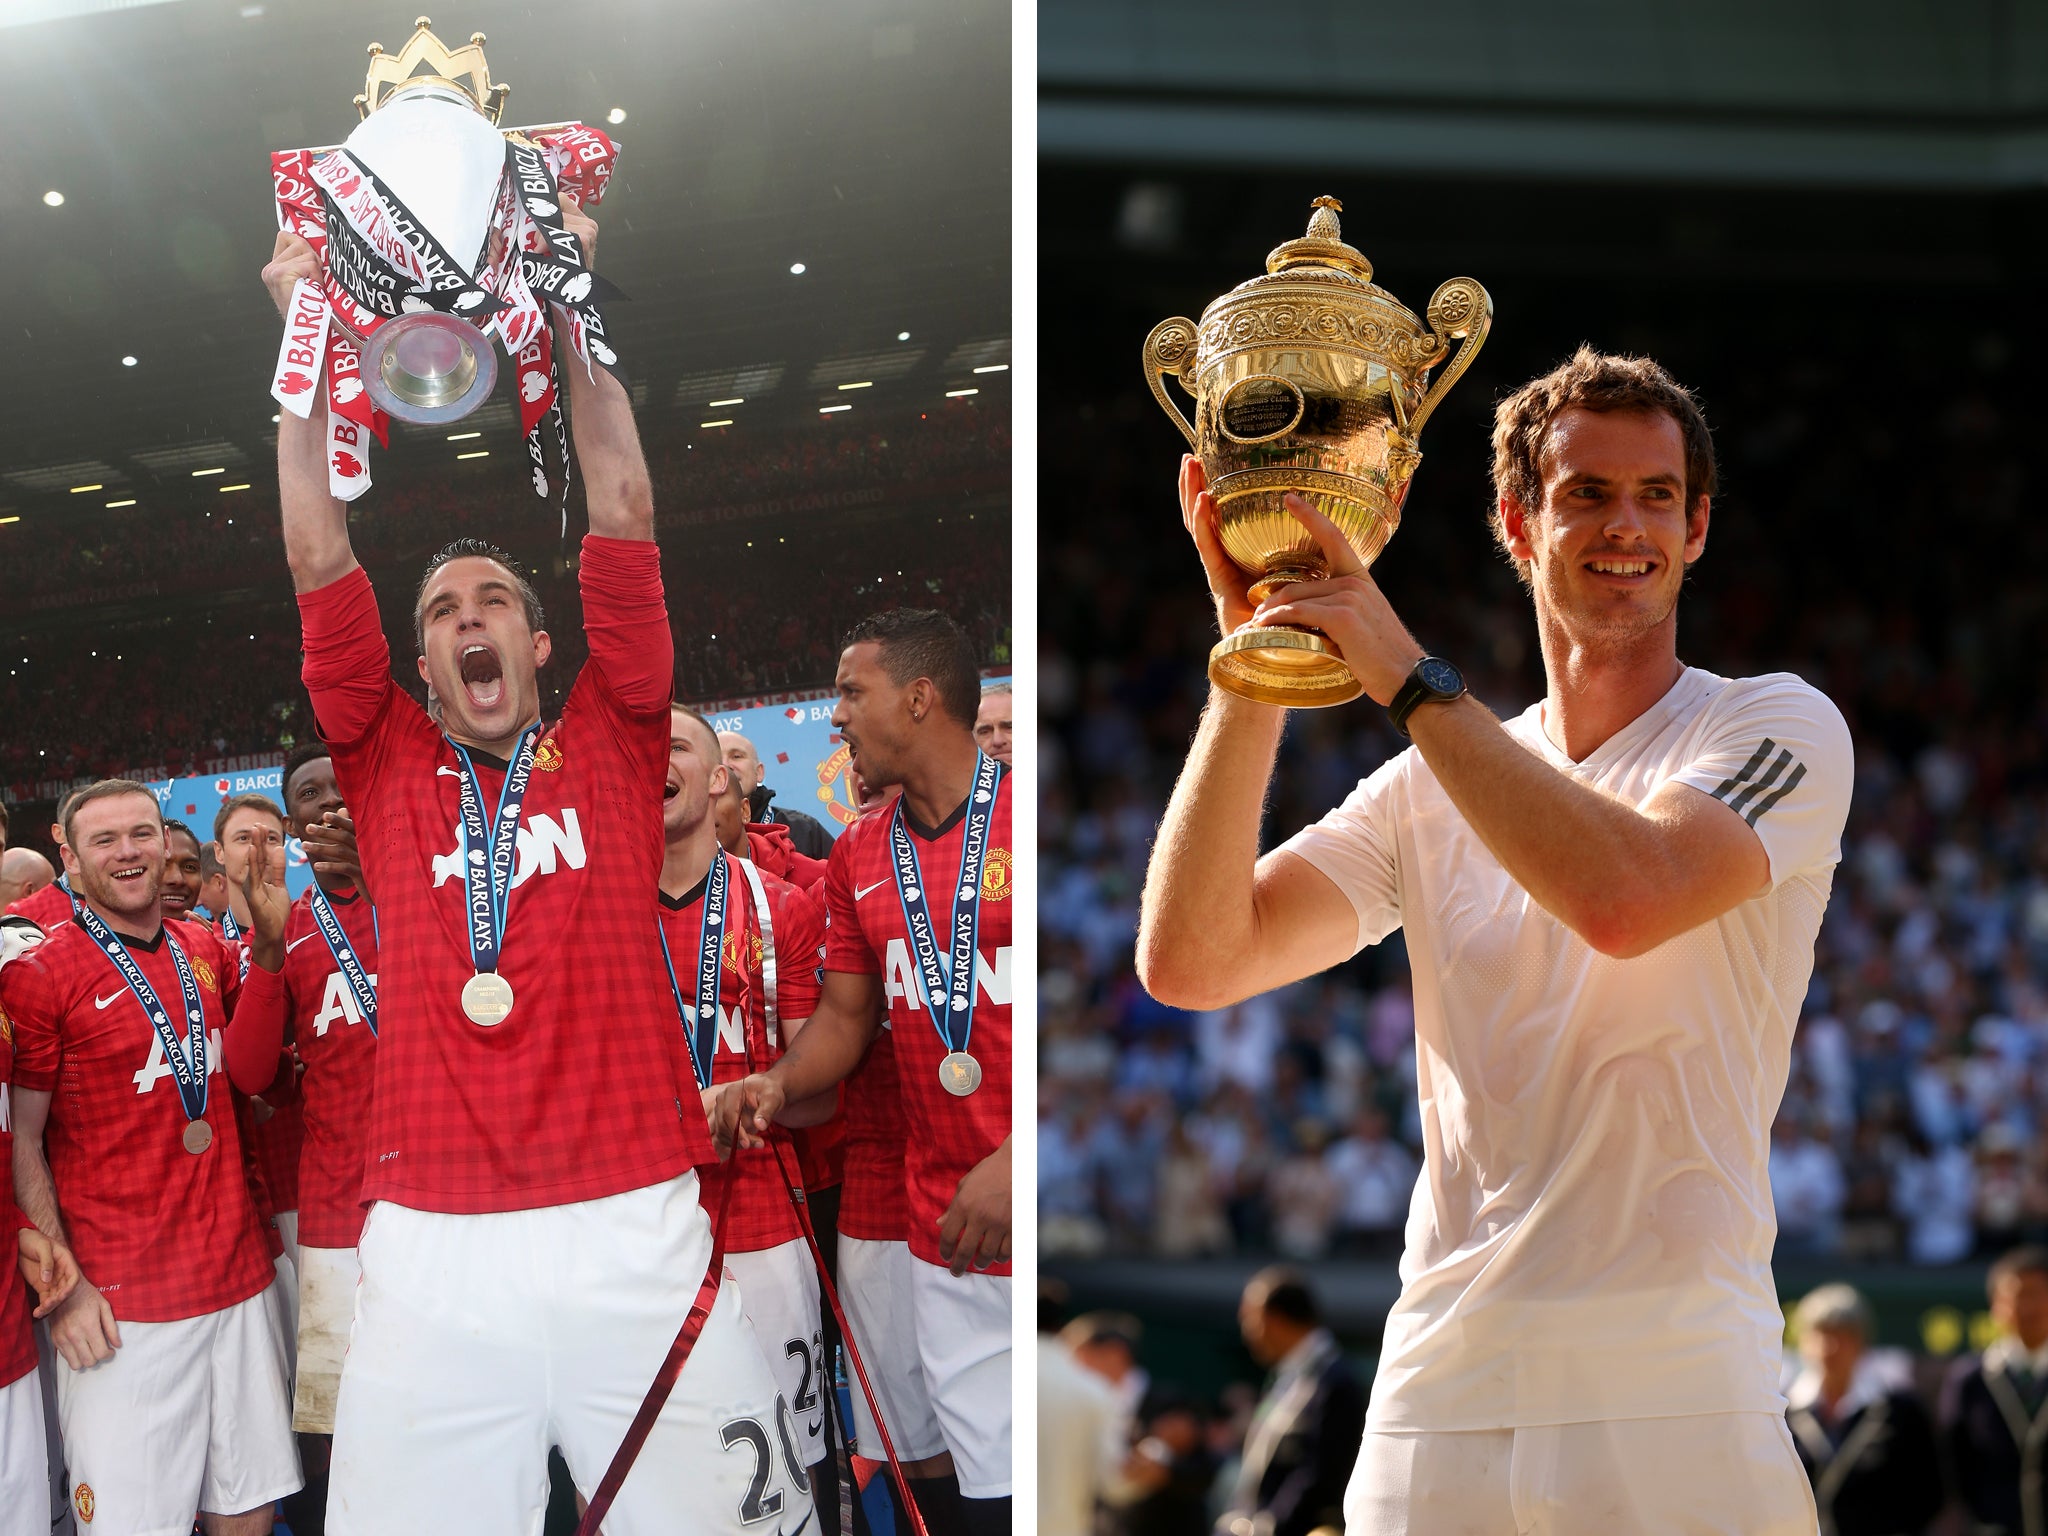 Sport England will have meeting with both the FA and the LTA after participation levels dropped